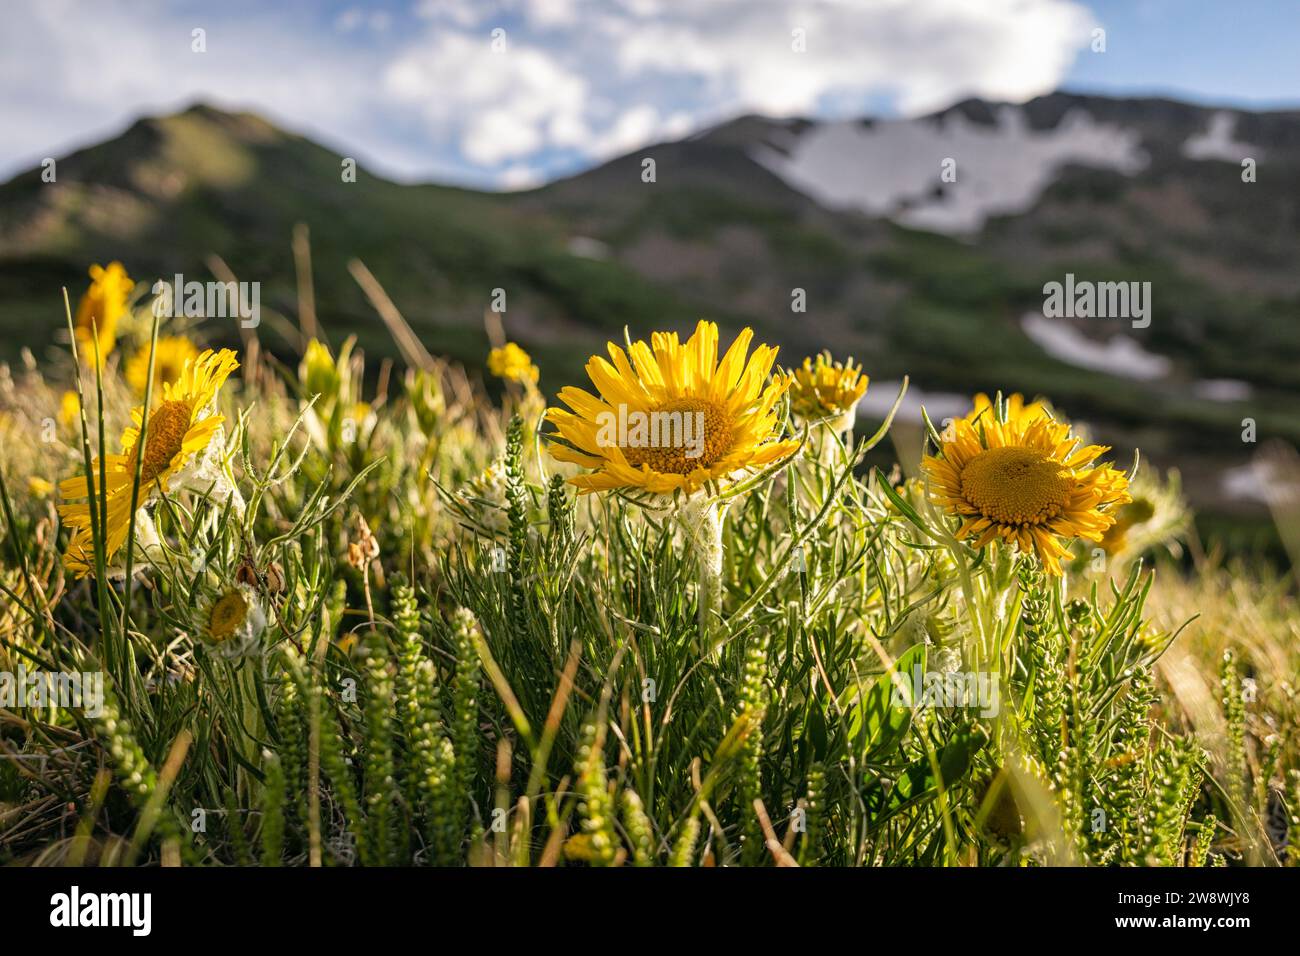 Old man of the mountain in an alpine setting, Colorado Stock Photo